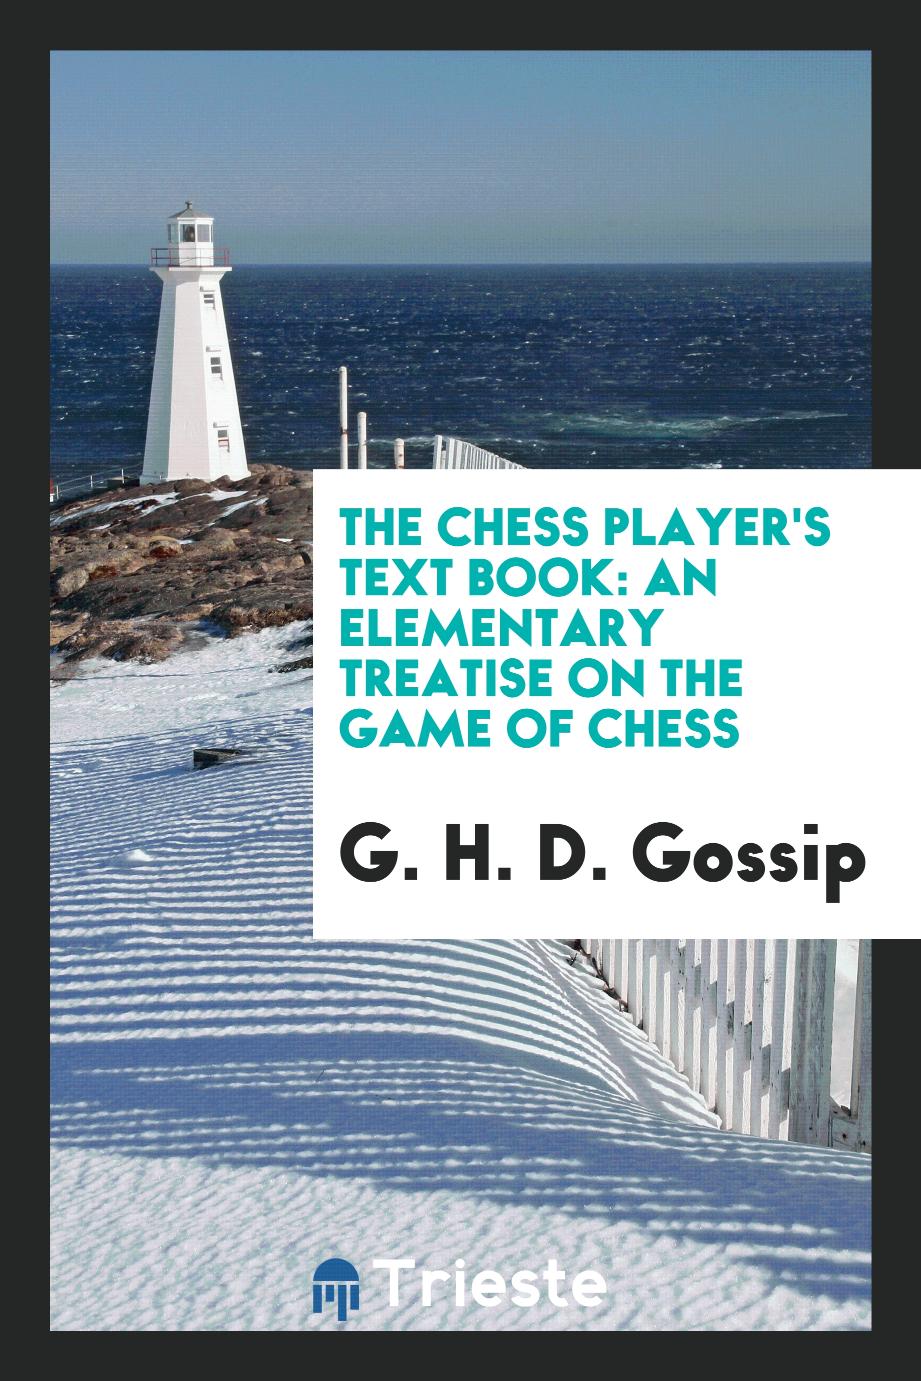 The Chess Player's Text Book: An Elementary Treatise on the Game of Chess